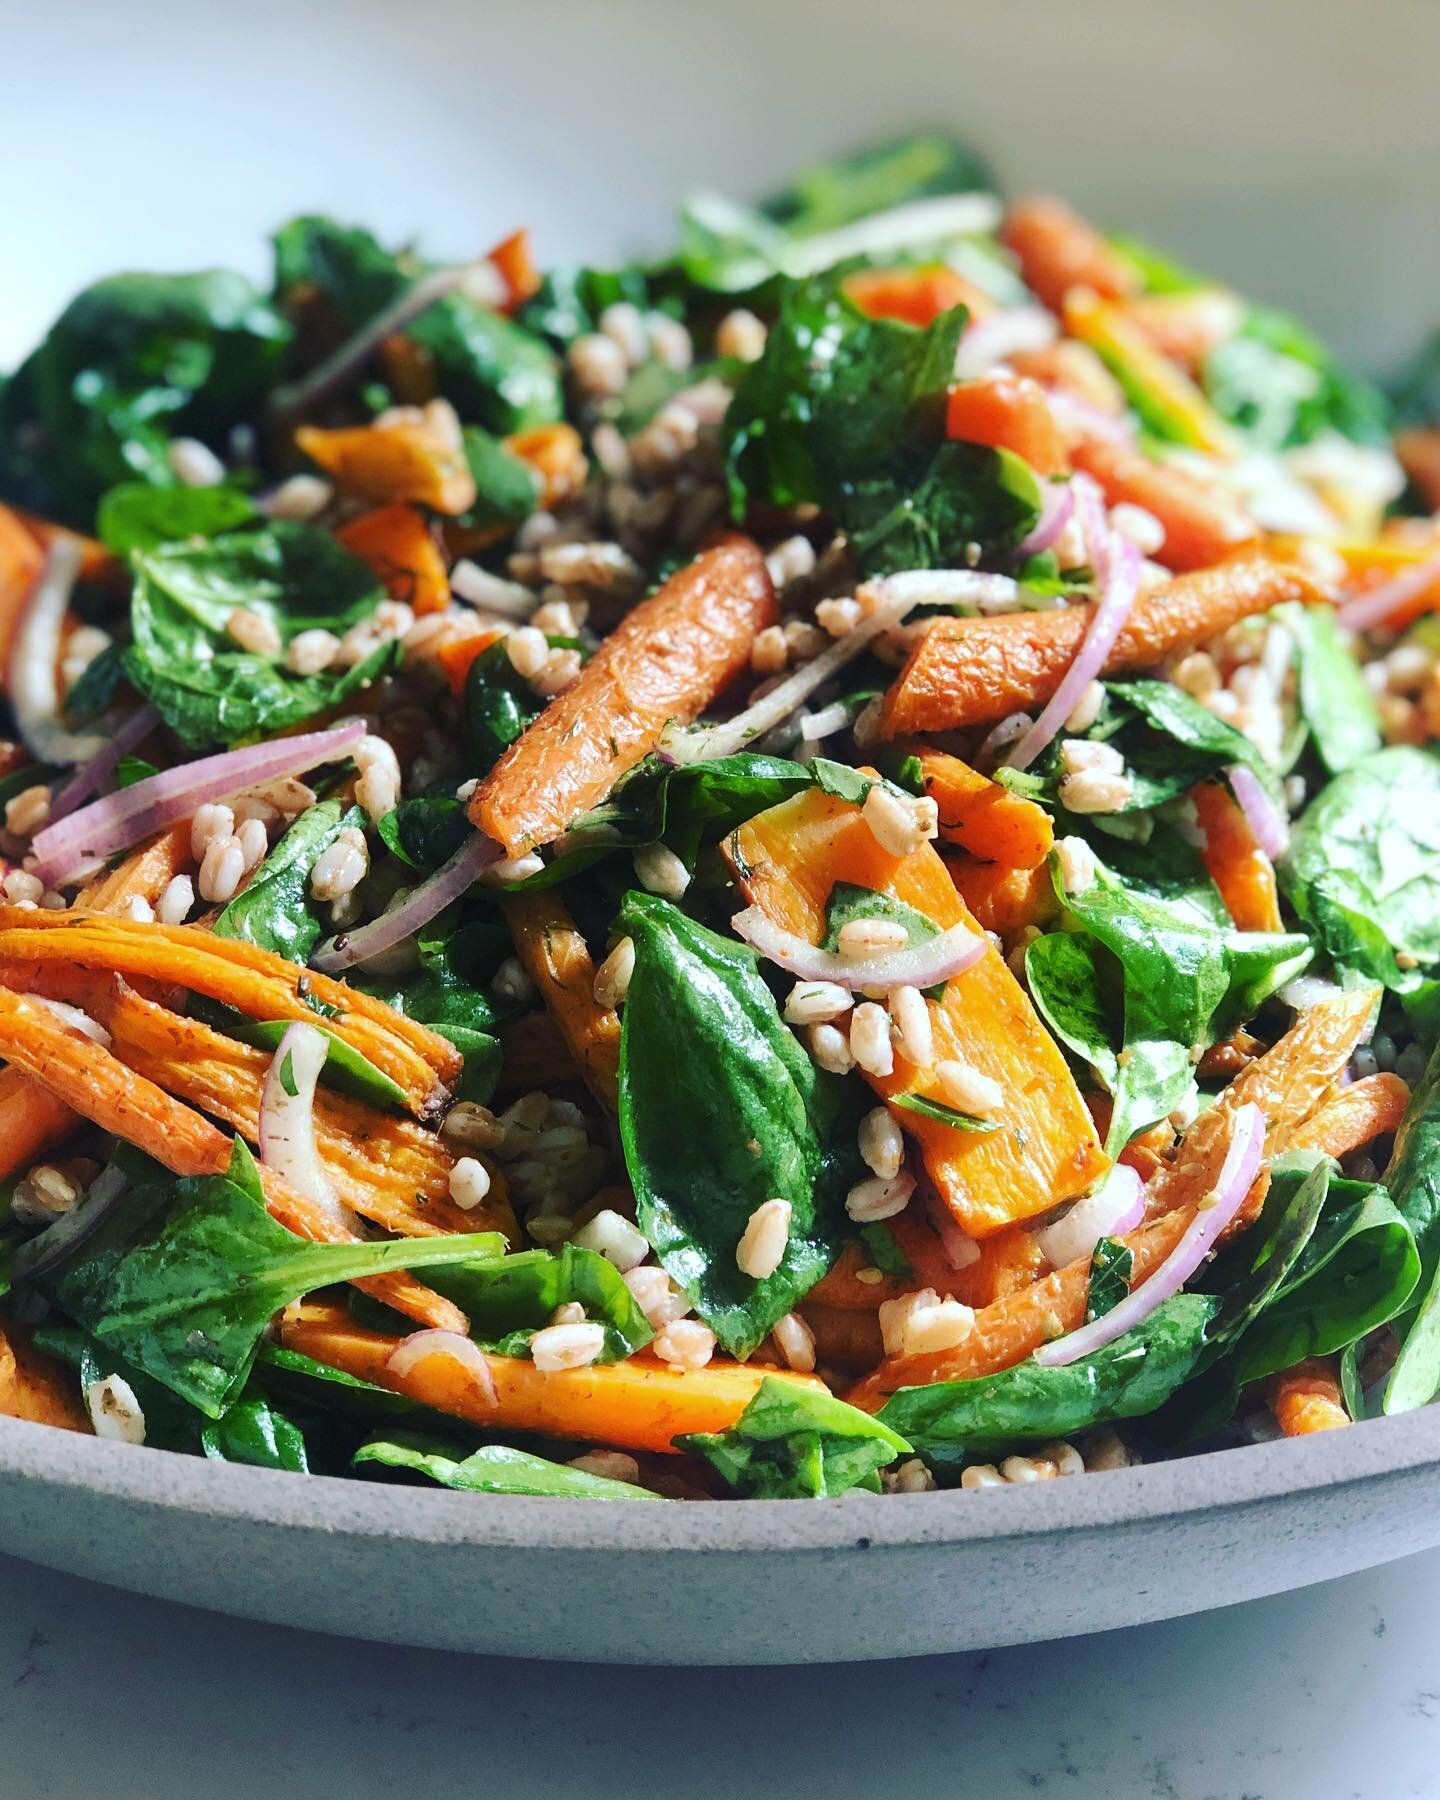 One of our all-time favorite salads is on the menu today&mdash;za&rsquo;atar roasted carrots with baby spinach, farro and a maple-orange dressing. This used to be our &lsquo;lunch date&rsquo; salad back in Sydney and we love it so much, its recipe au